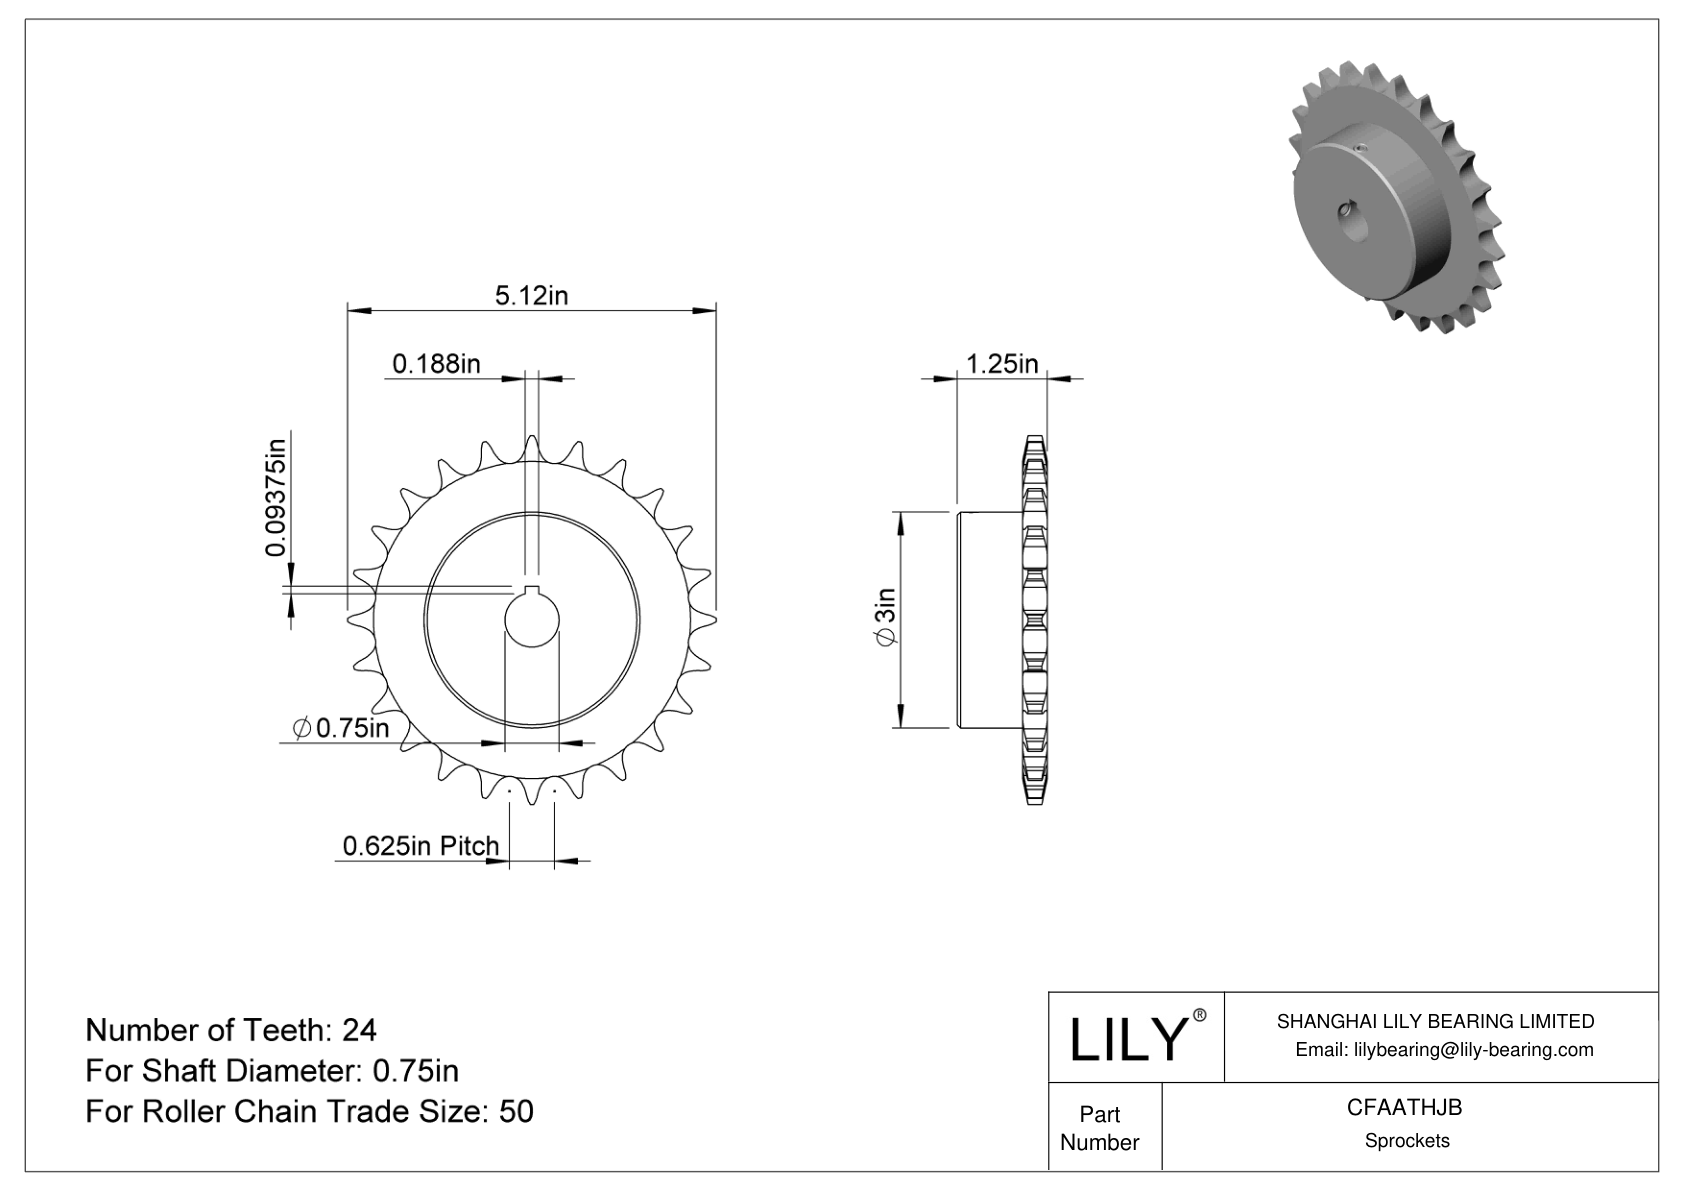 CFAATHJB Wear-Resistant Sprockets for ANSI Roller Chain cad drawing